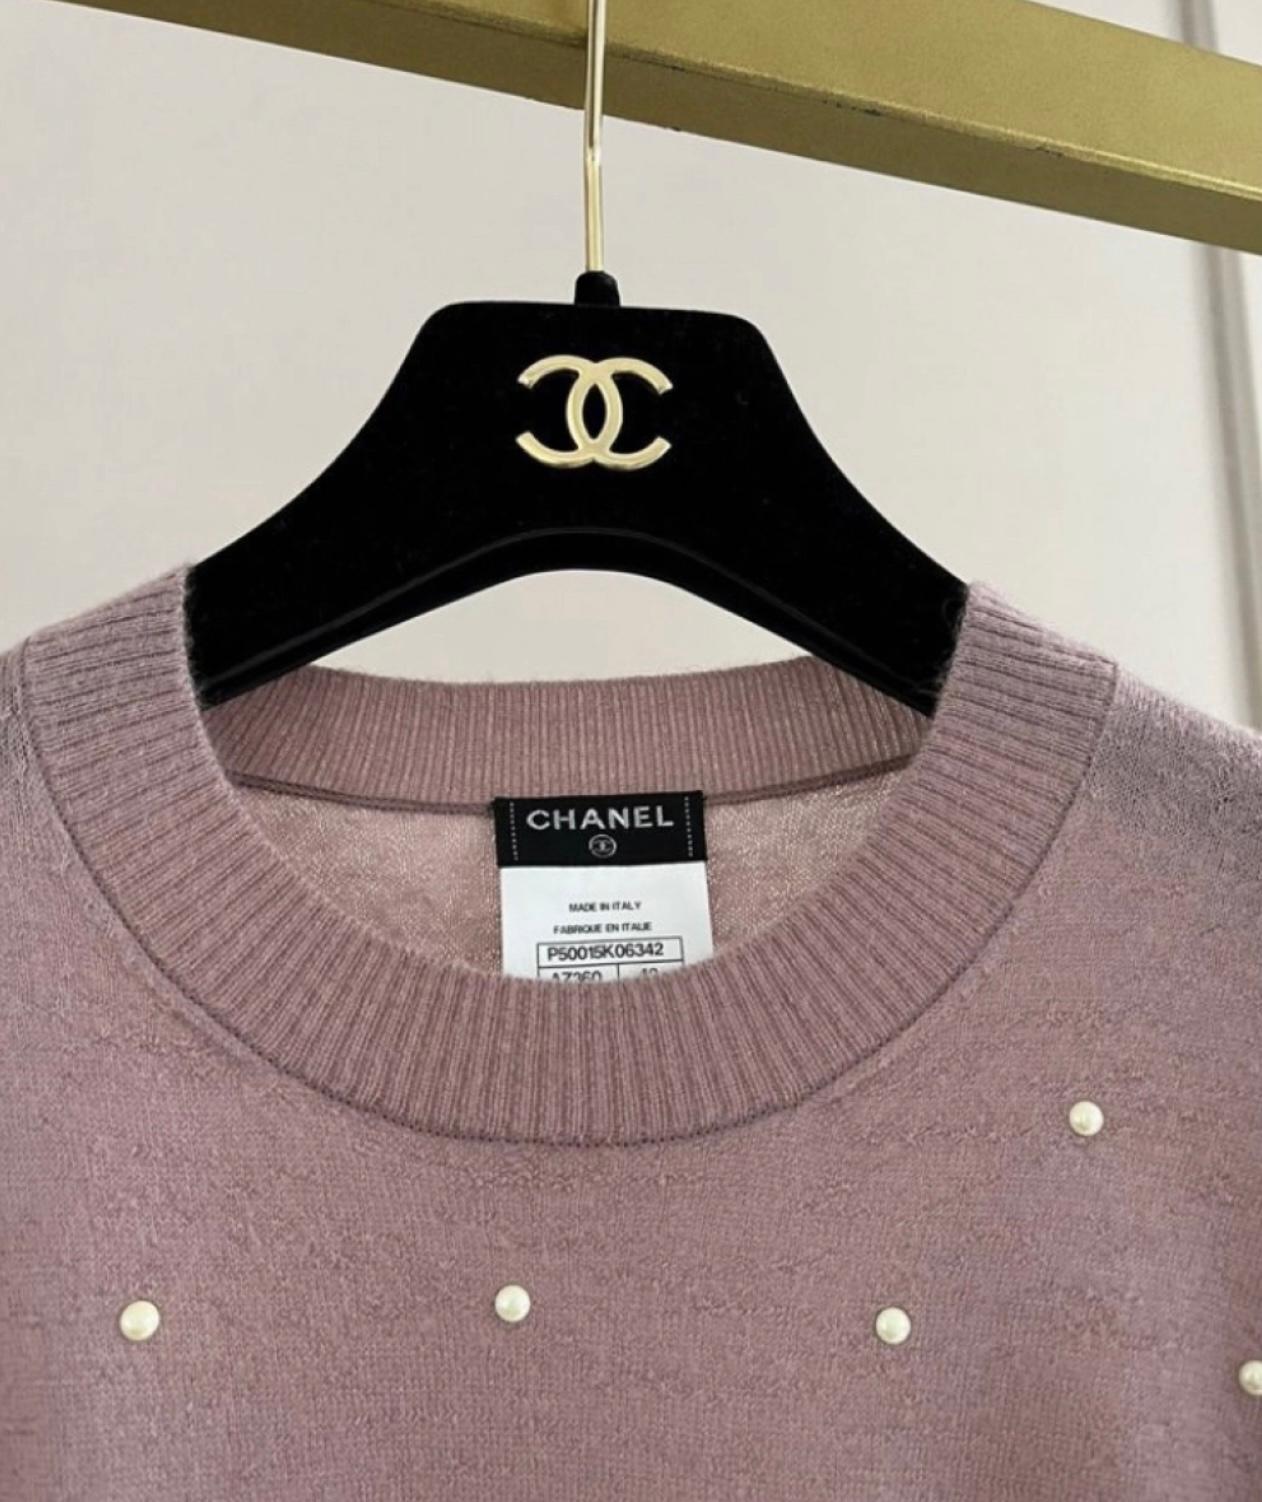 Chanel dusty rose mohair / cashmere jumper with pearl embellishment.
CC logo charm at waist
Size mark 40 FR. Condition of a new thing.